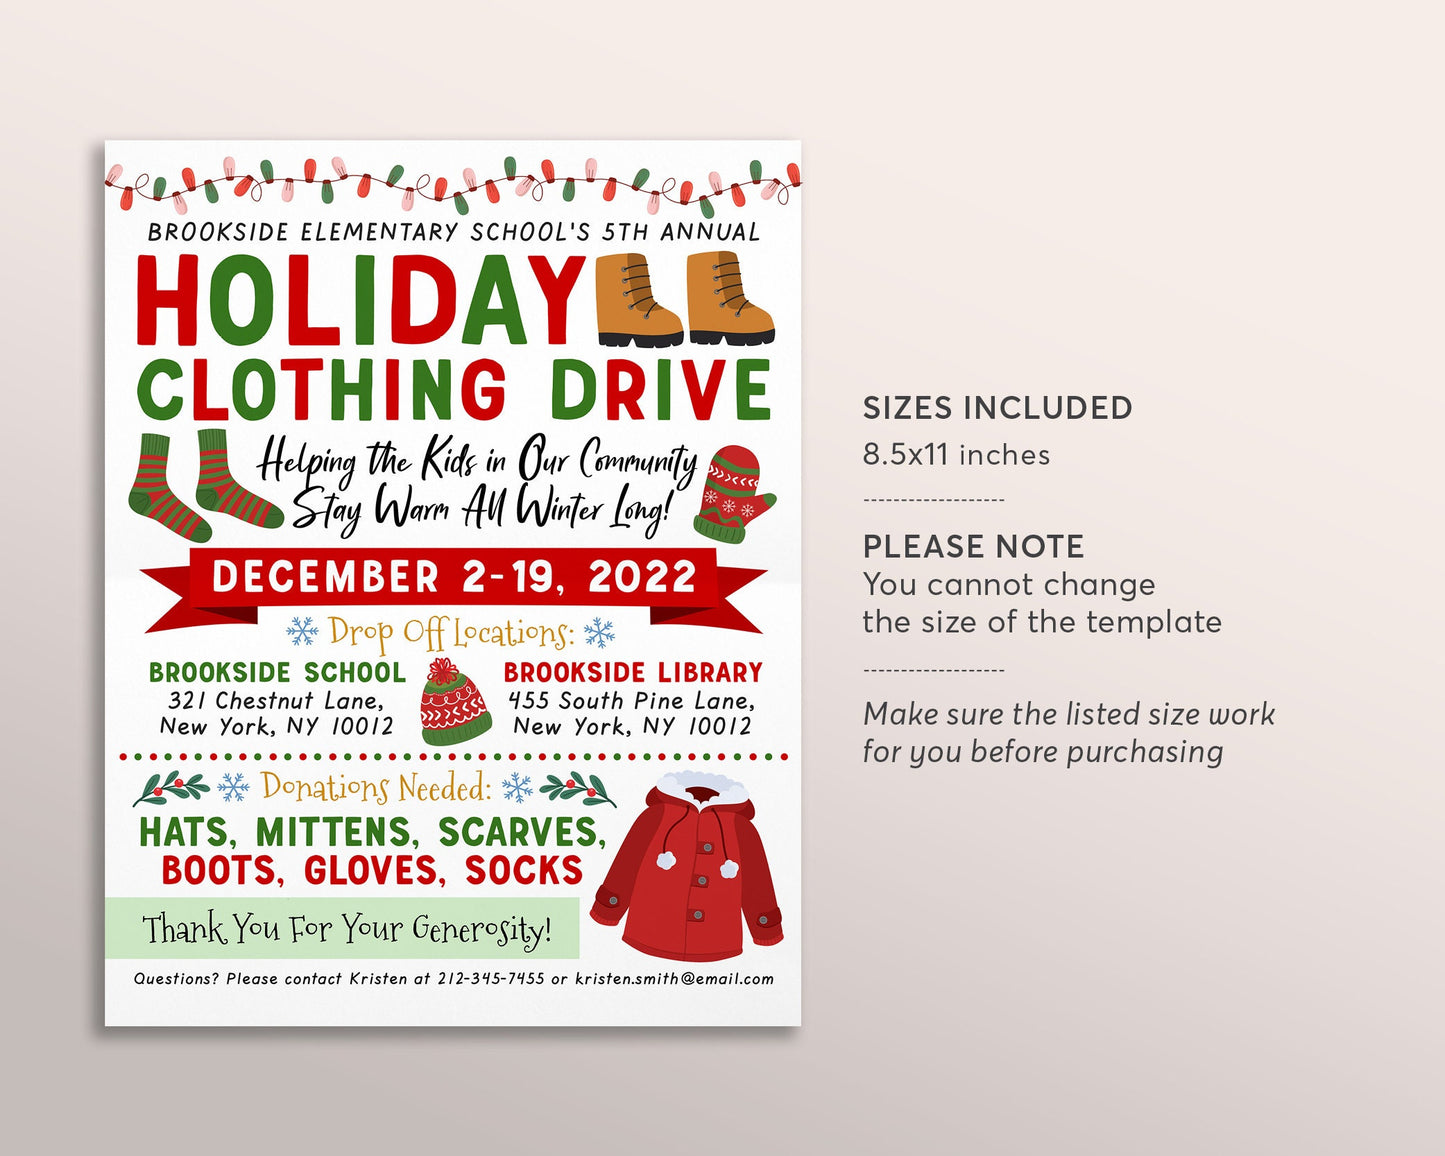 Holiday Clothing Drive Flyer Editable Template, Charity Church Fundraiser Printable PTA PTO, Christmas Cold Coat Jacket Donations Flyer